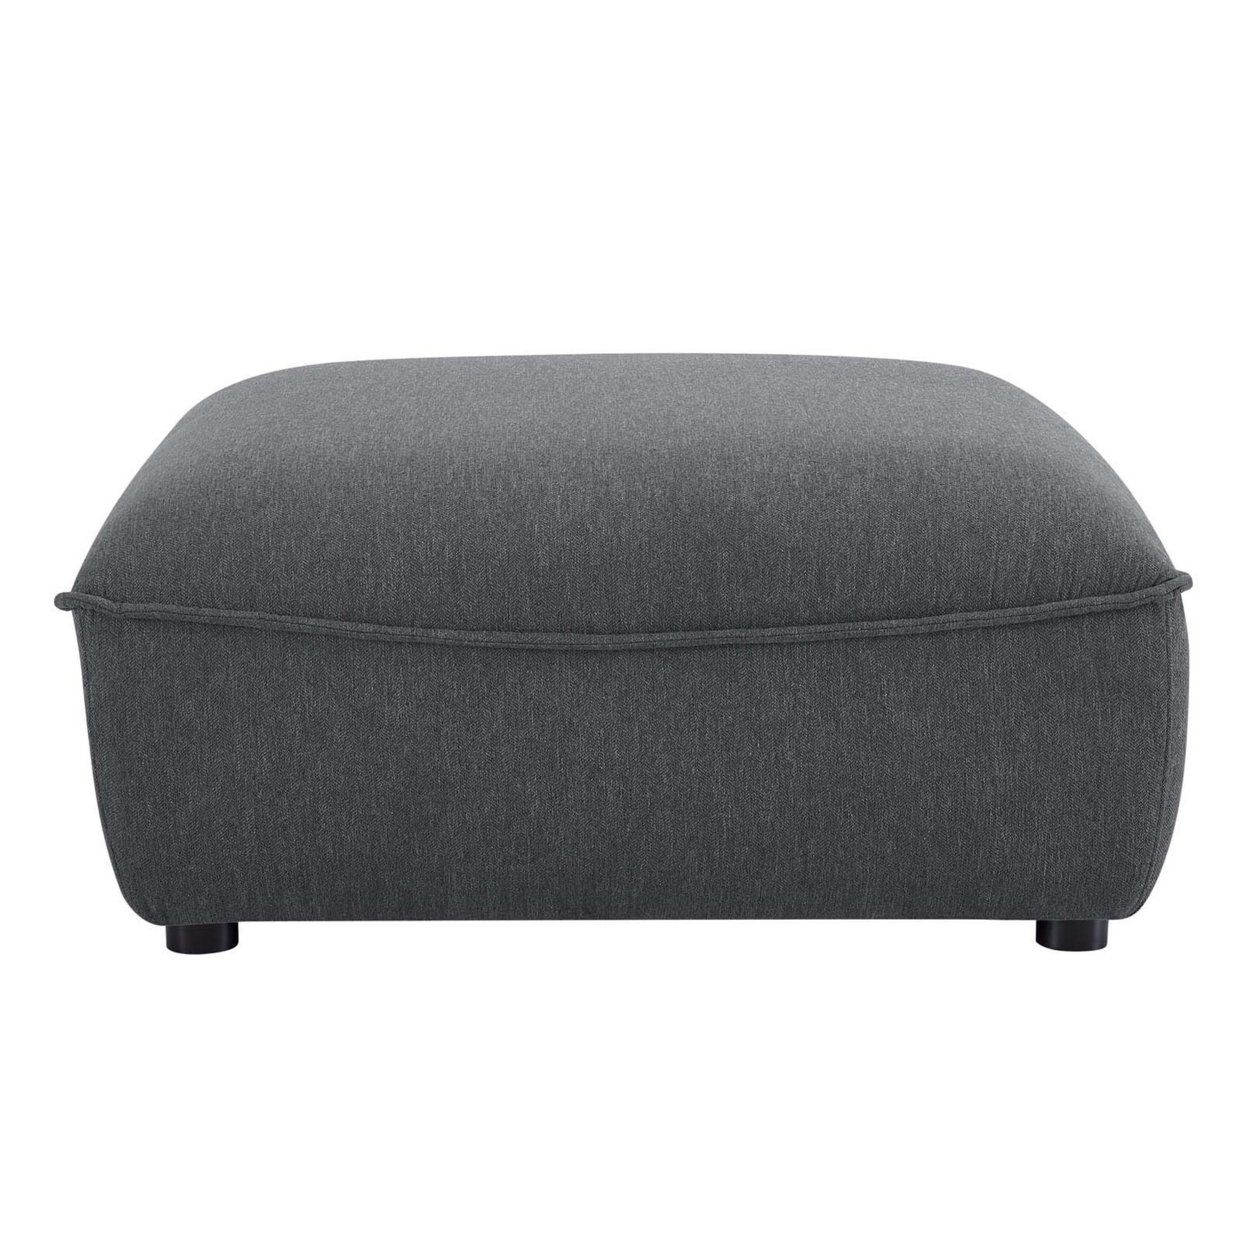 Comprise Sectional Sofa Ottoman, Charcoal